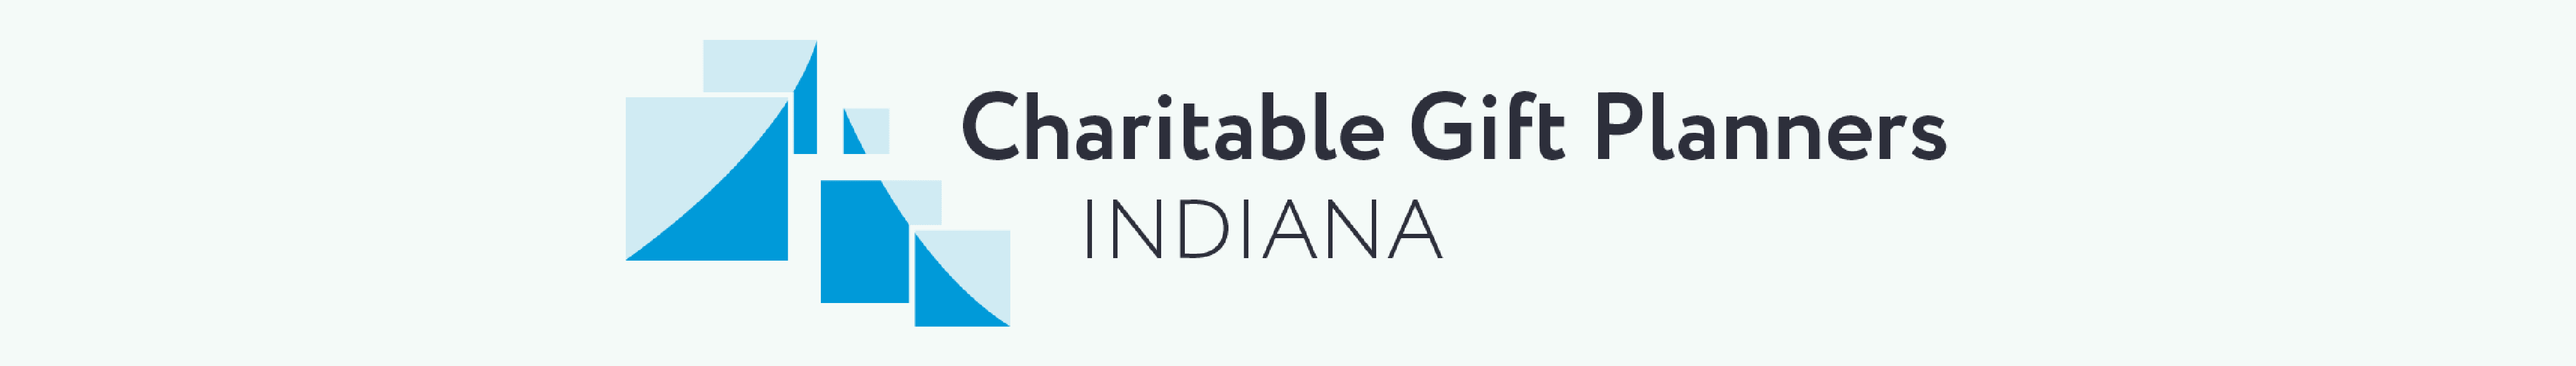 Charitable Gift Planners Indiana